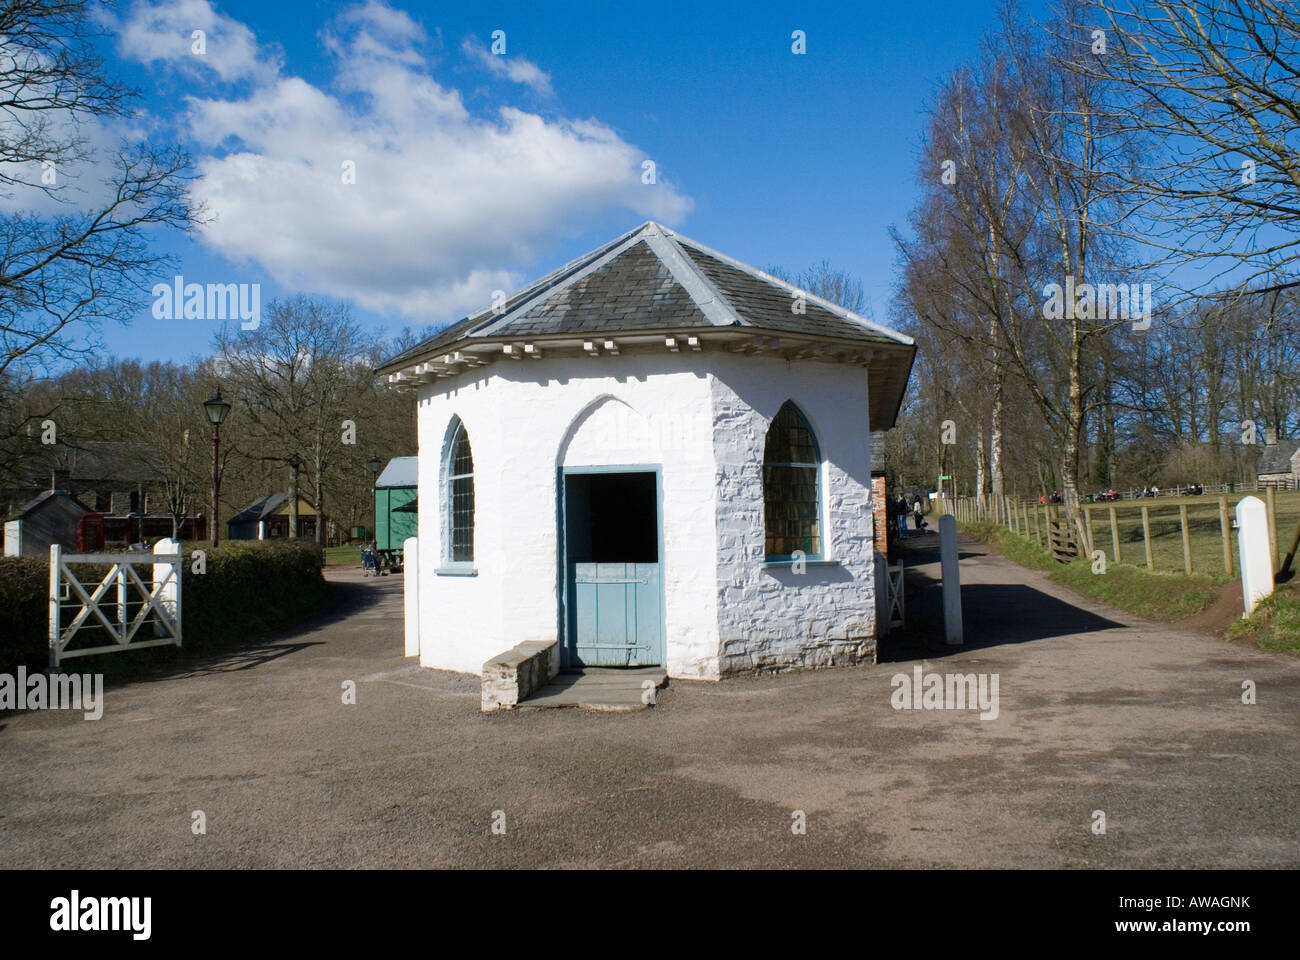 toll house national history museum st fagans cardiff south wales Stock Photo